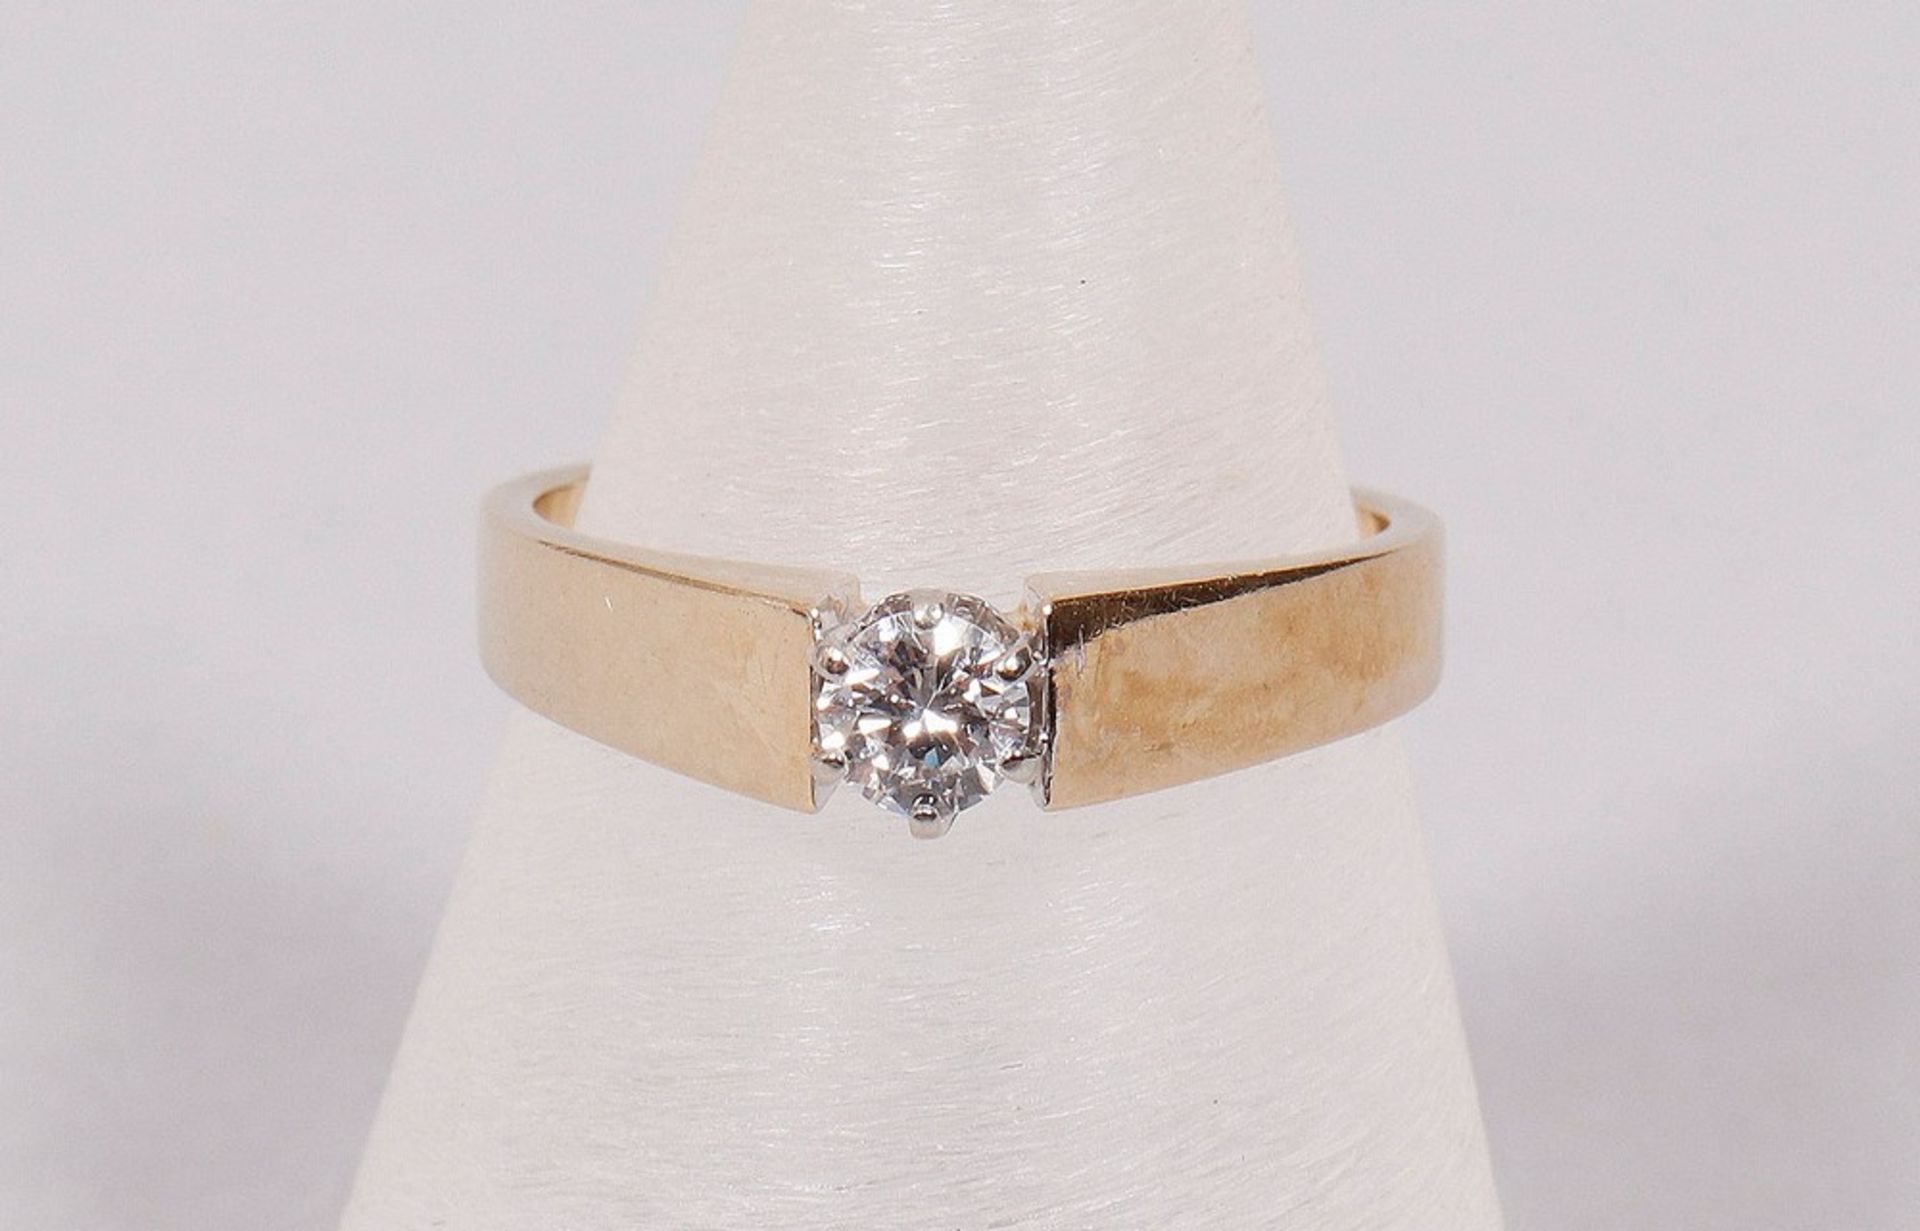 Ring, so-called engagement ring solitaire, 585 gold - Image 2 of 5